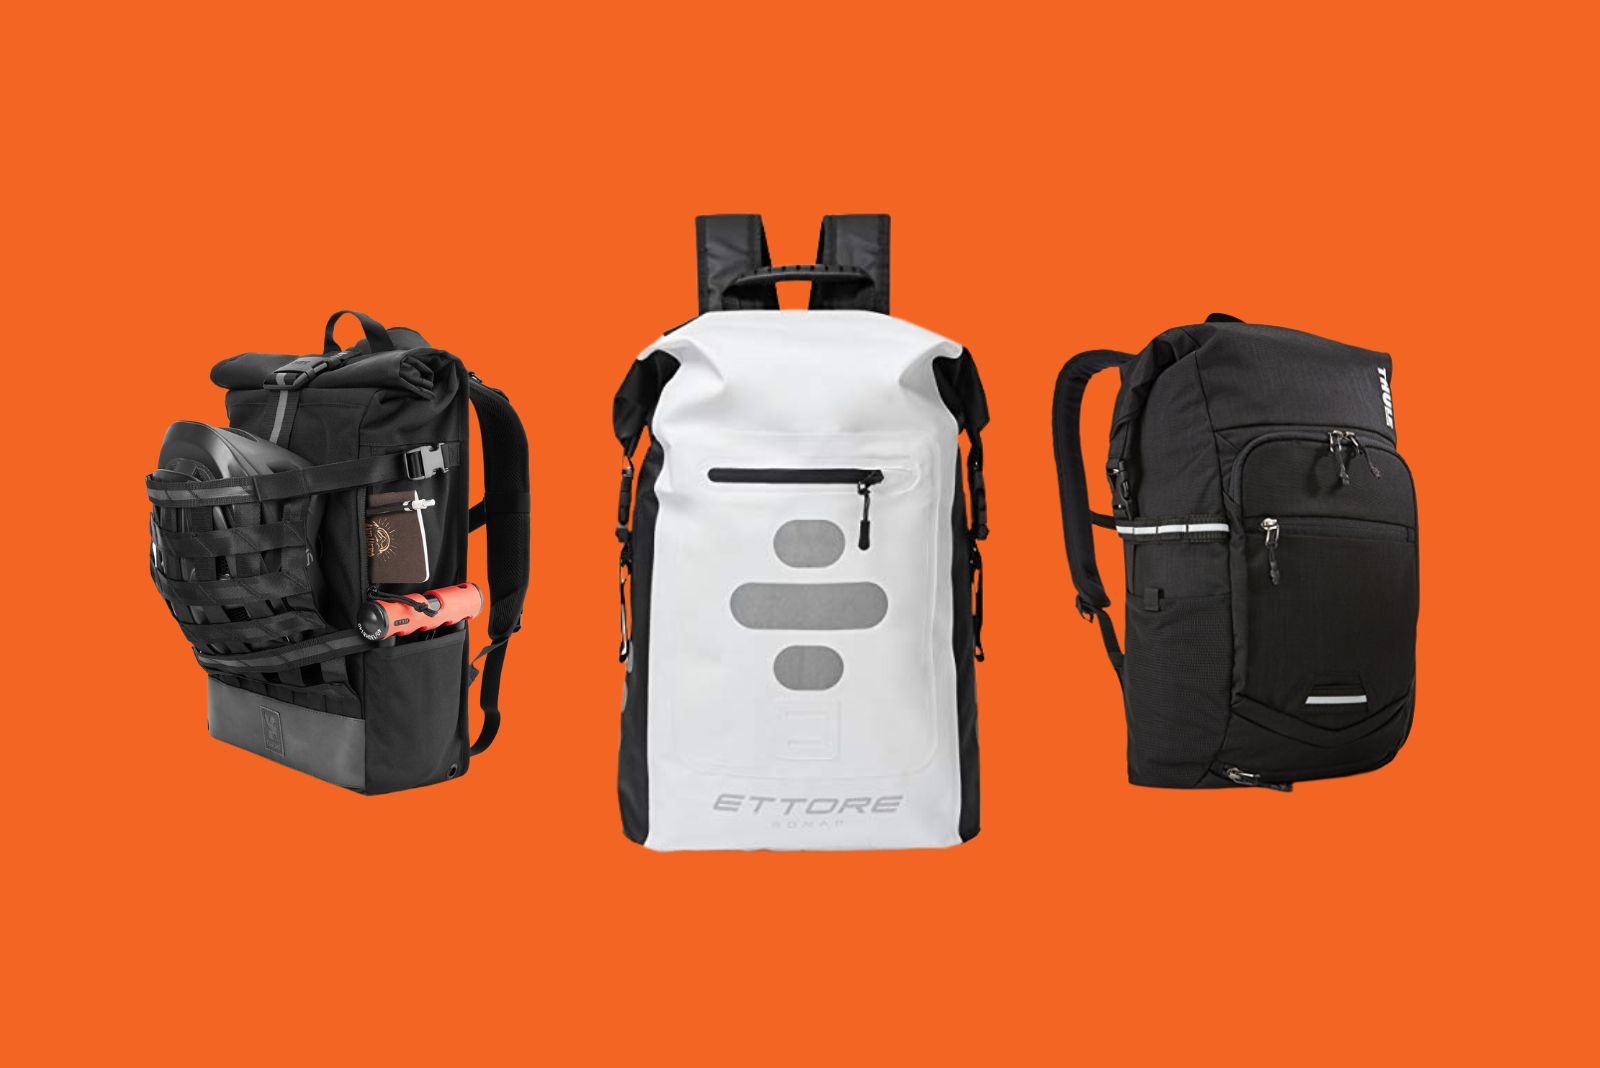 Details more than 83 best cycling bags - esthdonghoadian